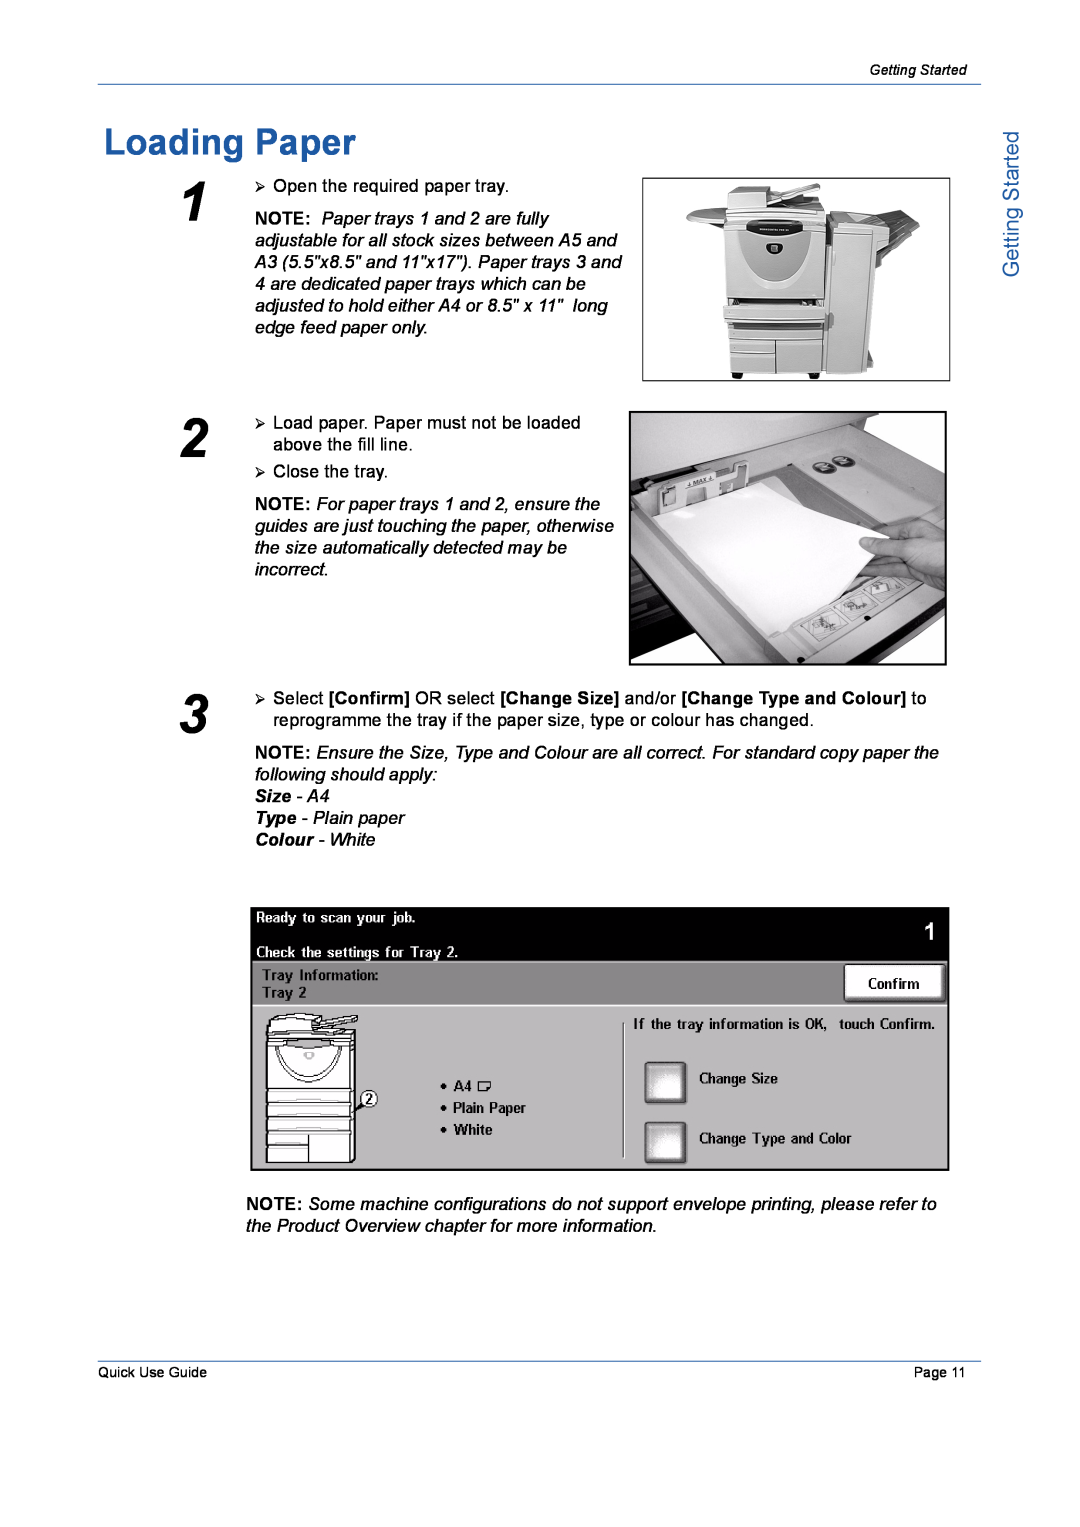 Xerox 5632 manual Loading Paper, Getting Started 